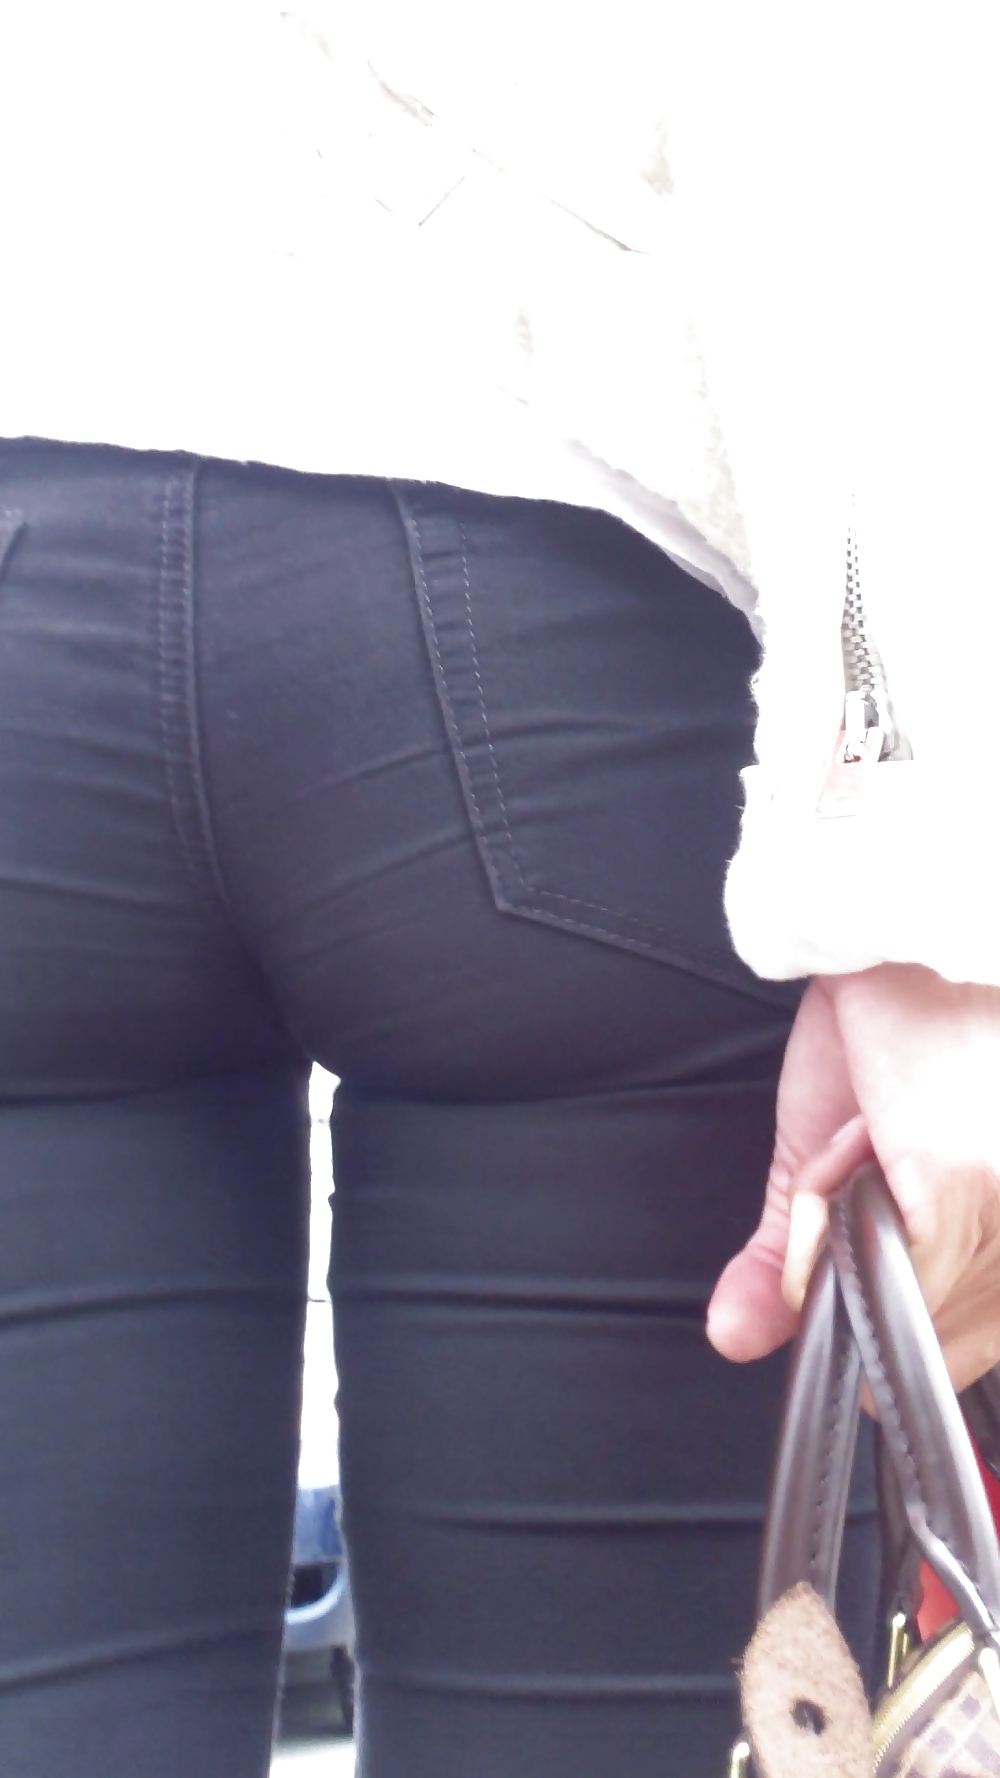 Tight teen butts & ass in jeans up close  #20660440